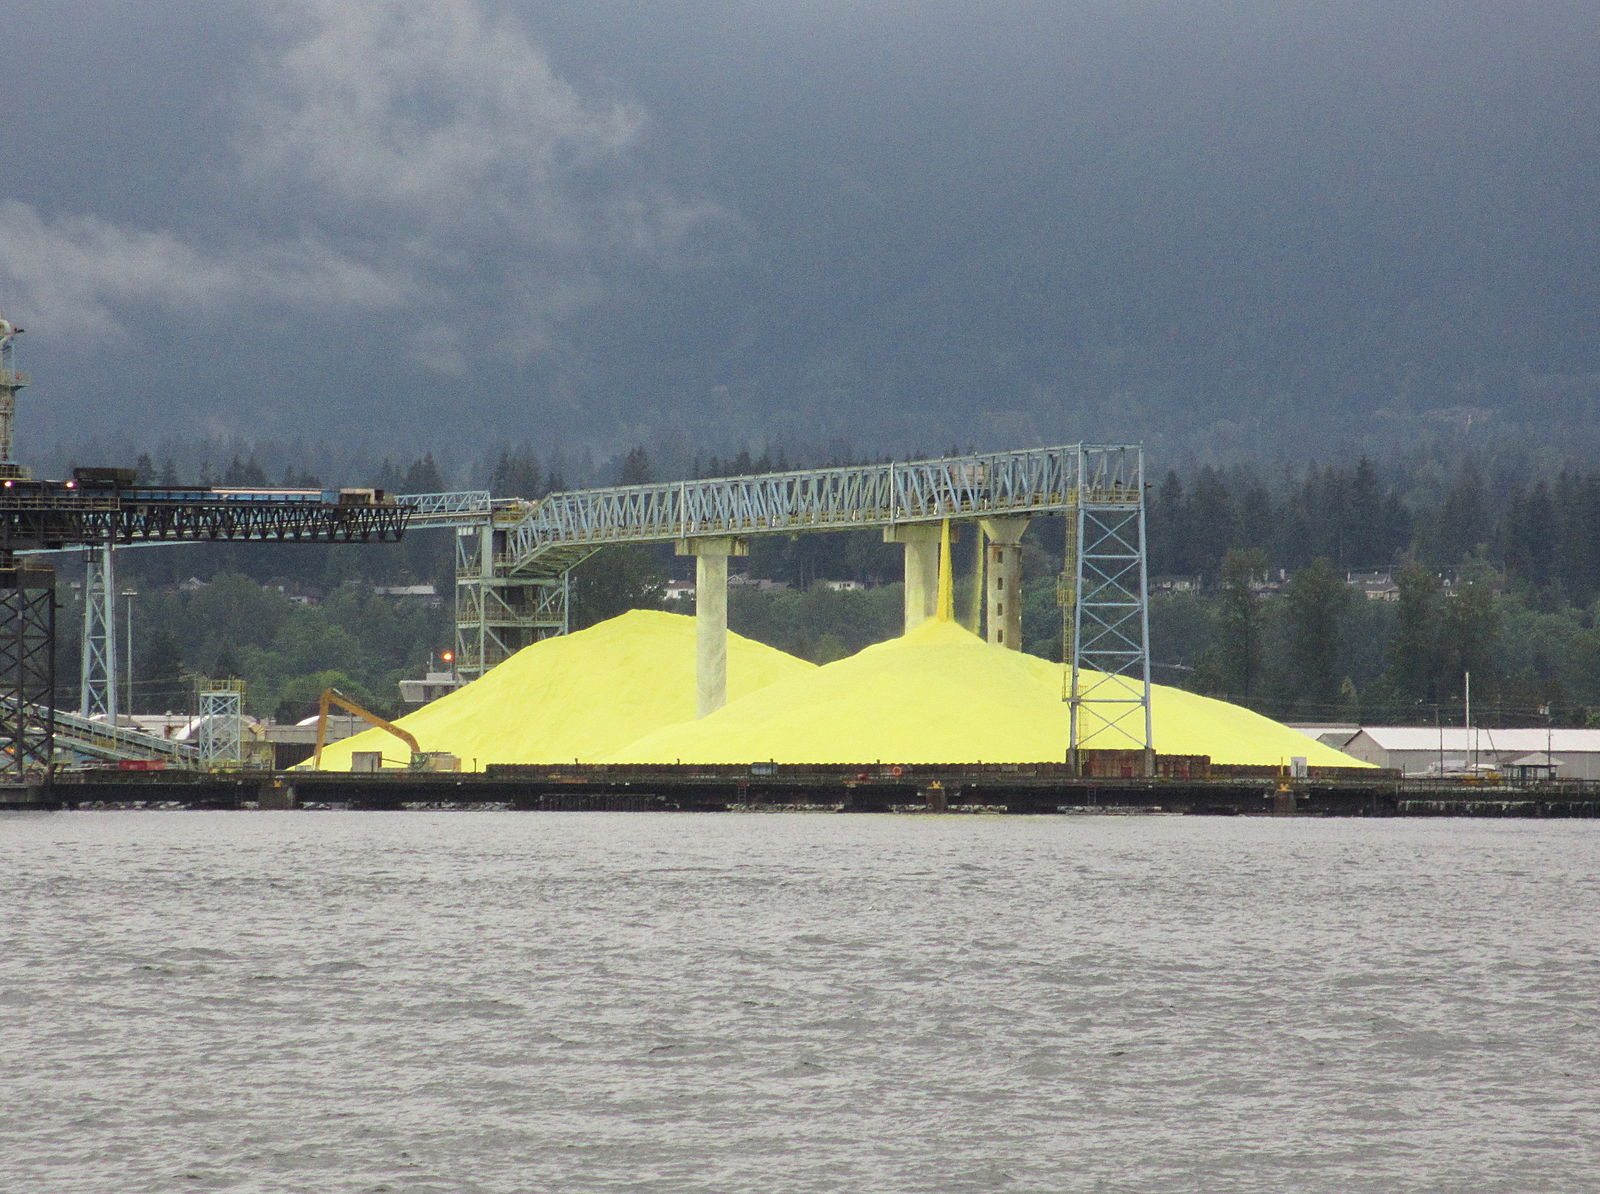 Fig. 5 One of the major reasons for iron sulfide’s very low cost is the low cost of sulfur, which is essentially a waste product. This image shows a sulfur stockpile in Vancouver Harbor.  (Wikimedia Commons)